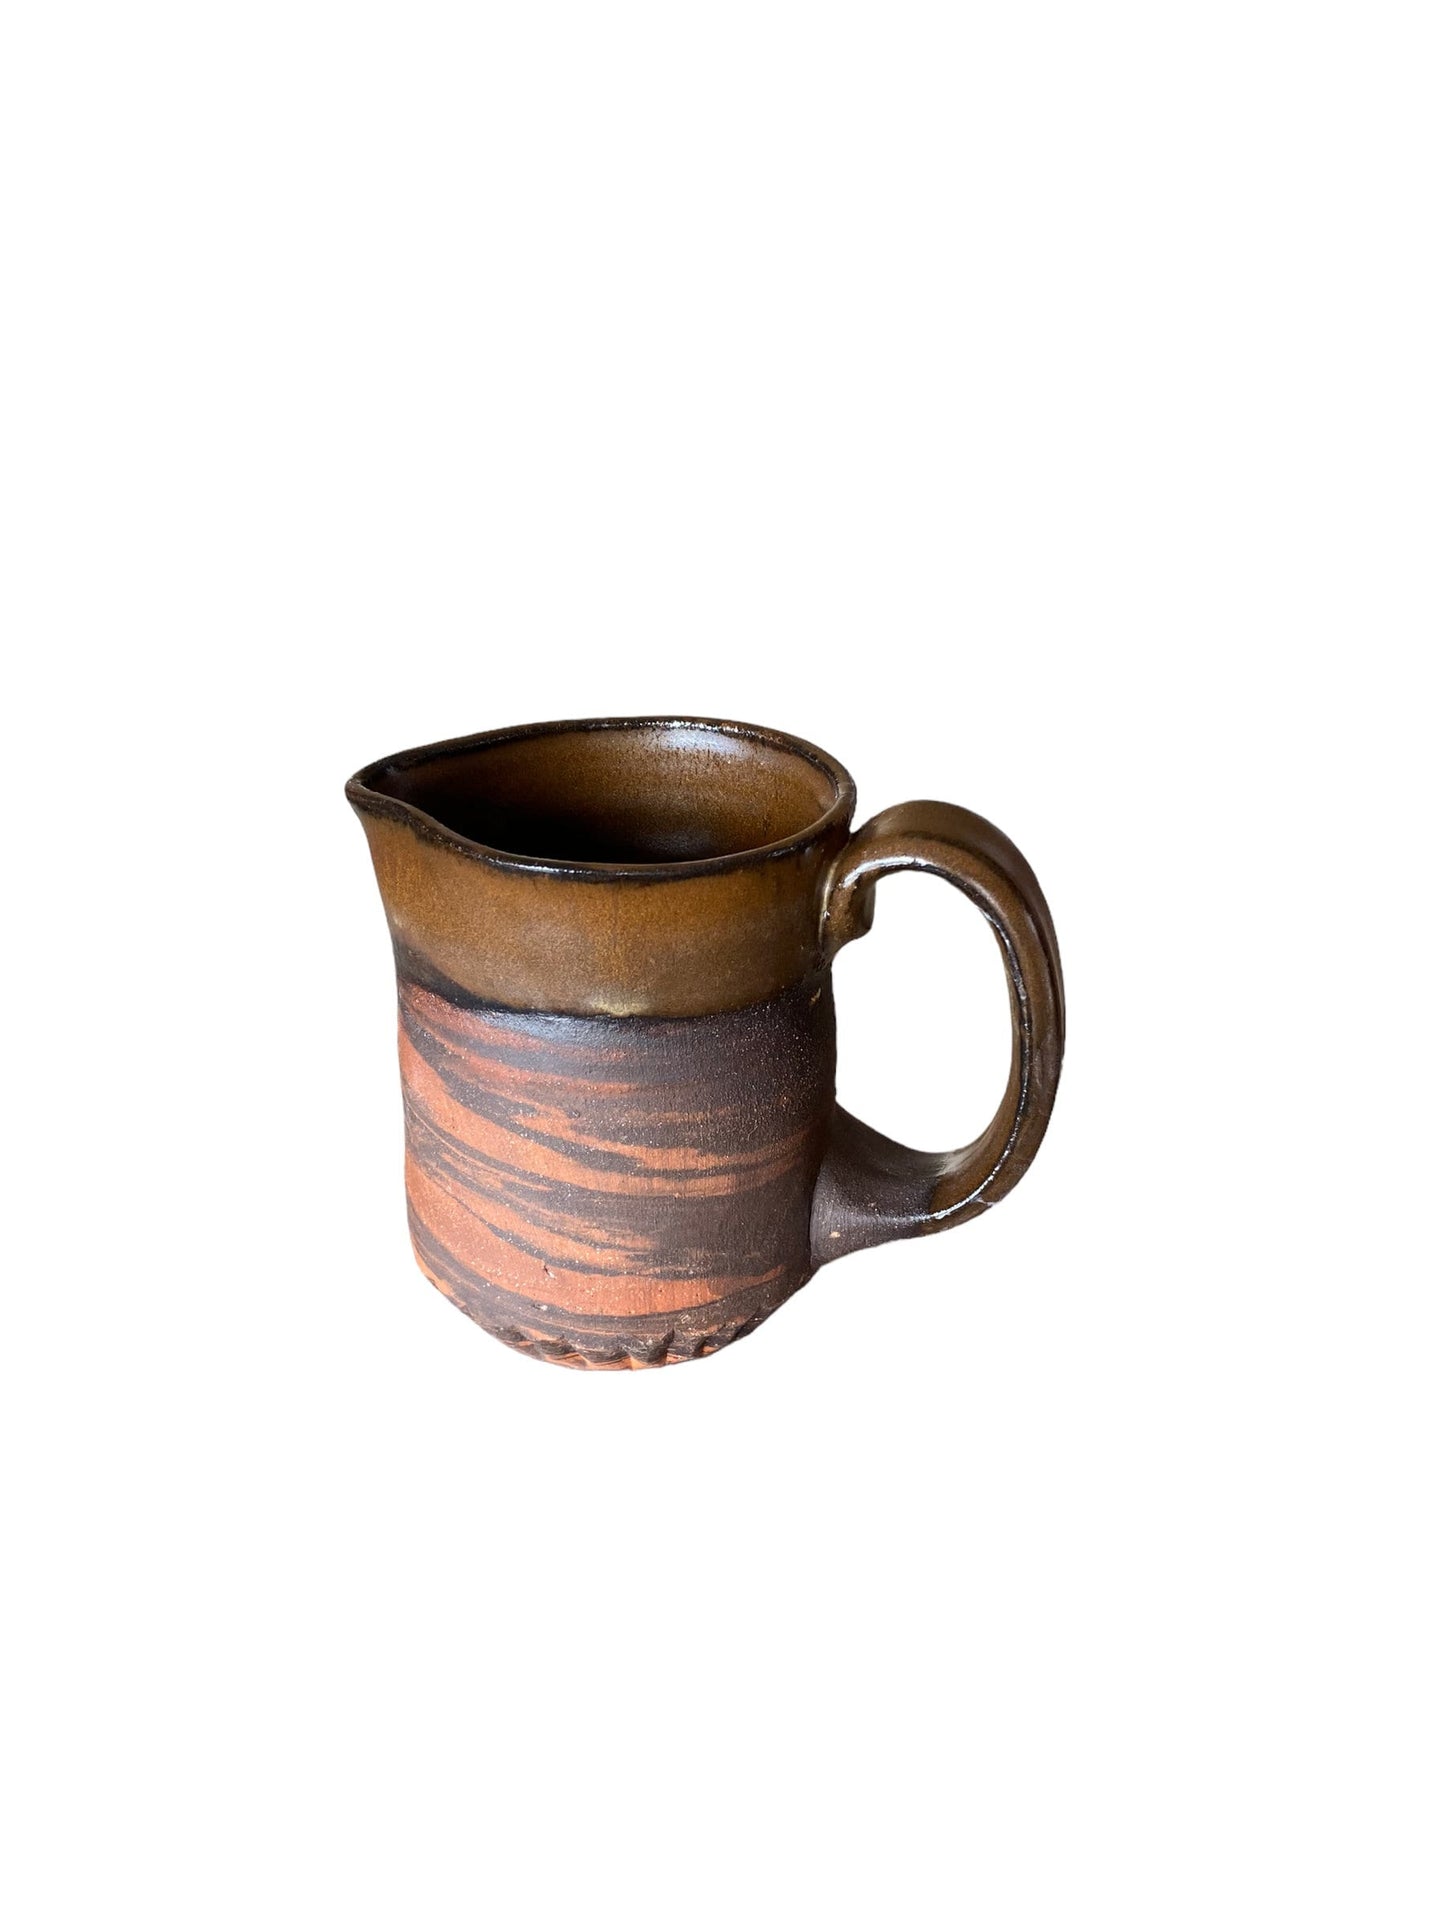 Small 8-Ounce Agateware Creamer: Artisan Crafted Elegance for Your Coffee or Tea Service